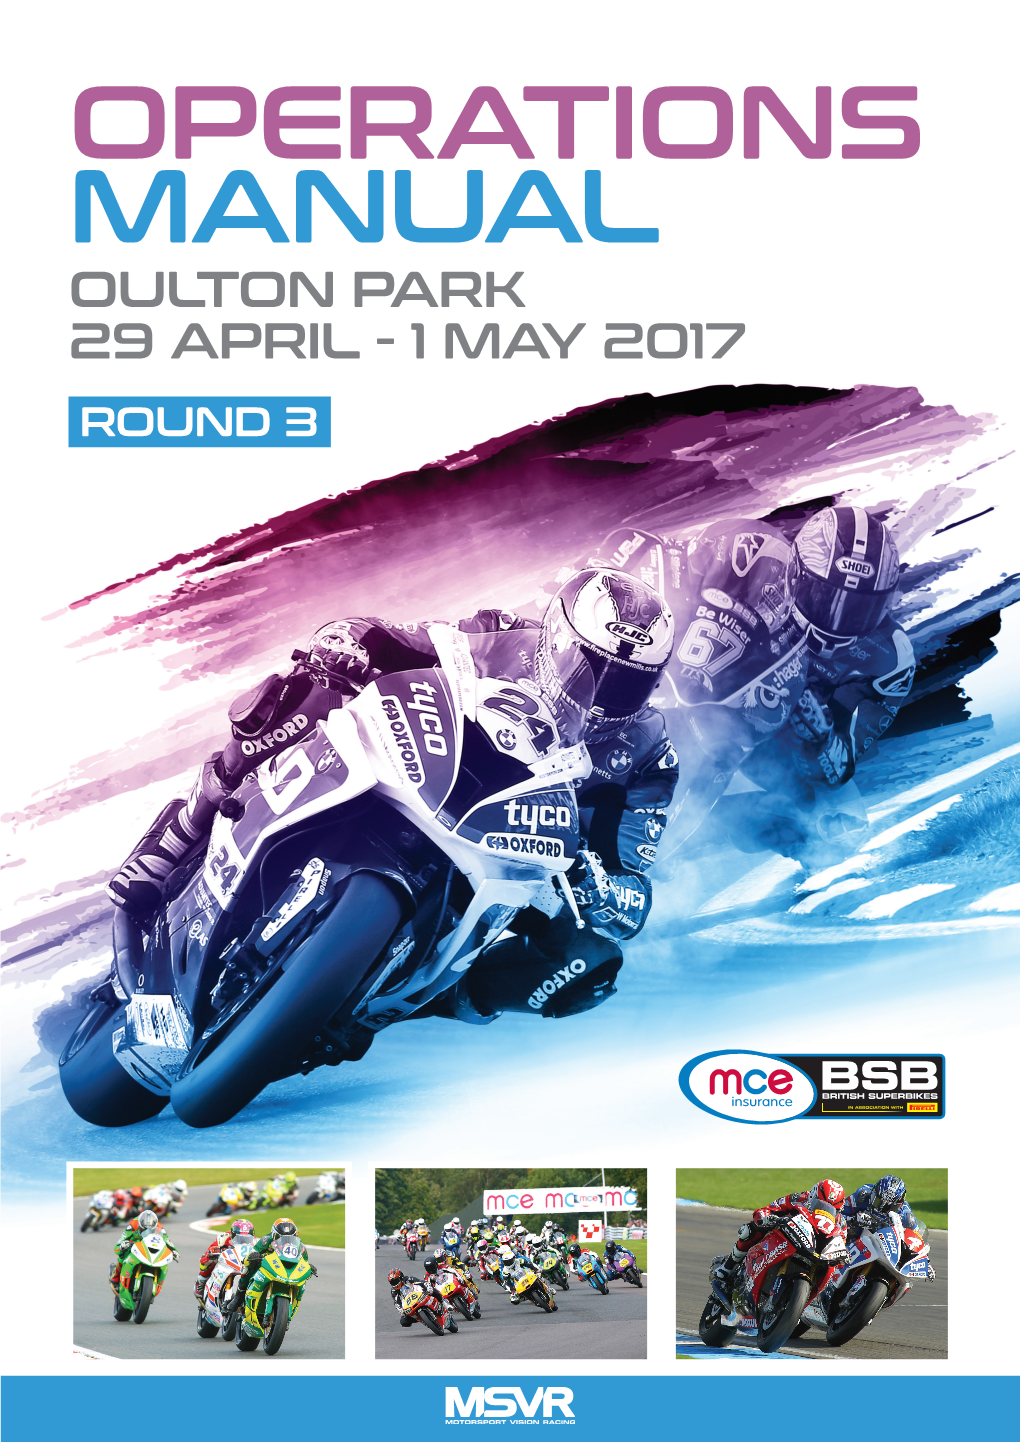 Operations Manual Oulton Park 29 April - 1 May 2017 Round 3